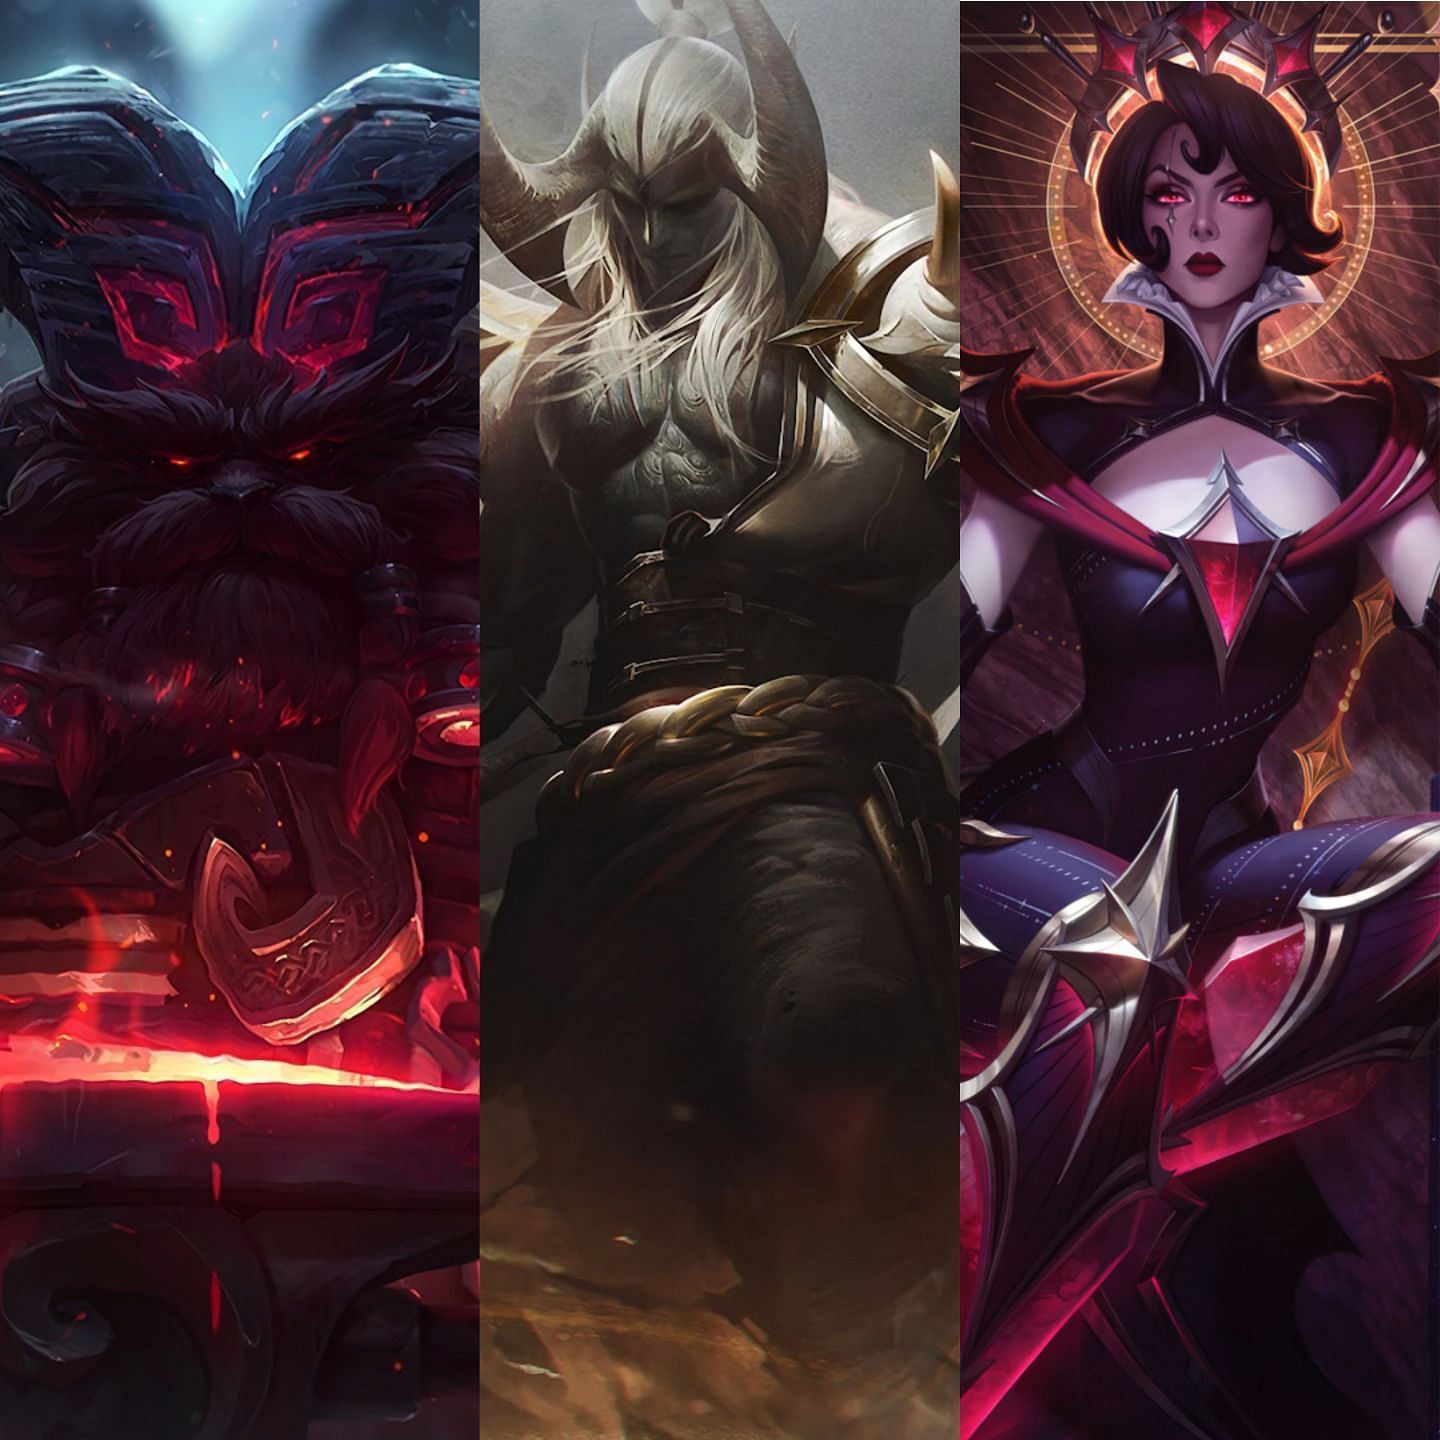 Ornn, Aatrox, and Camille are certain to have high presence at Worlds 2022